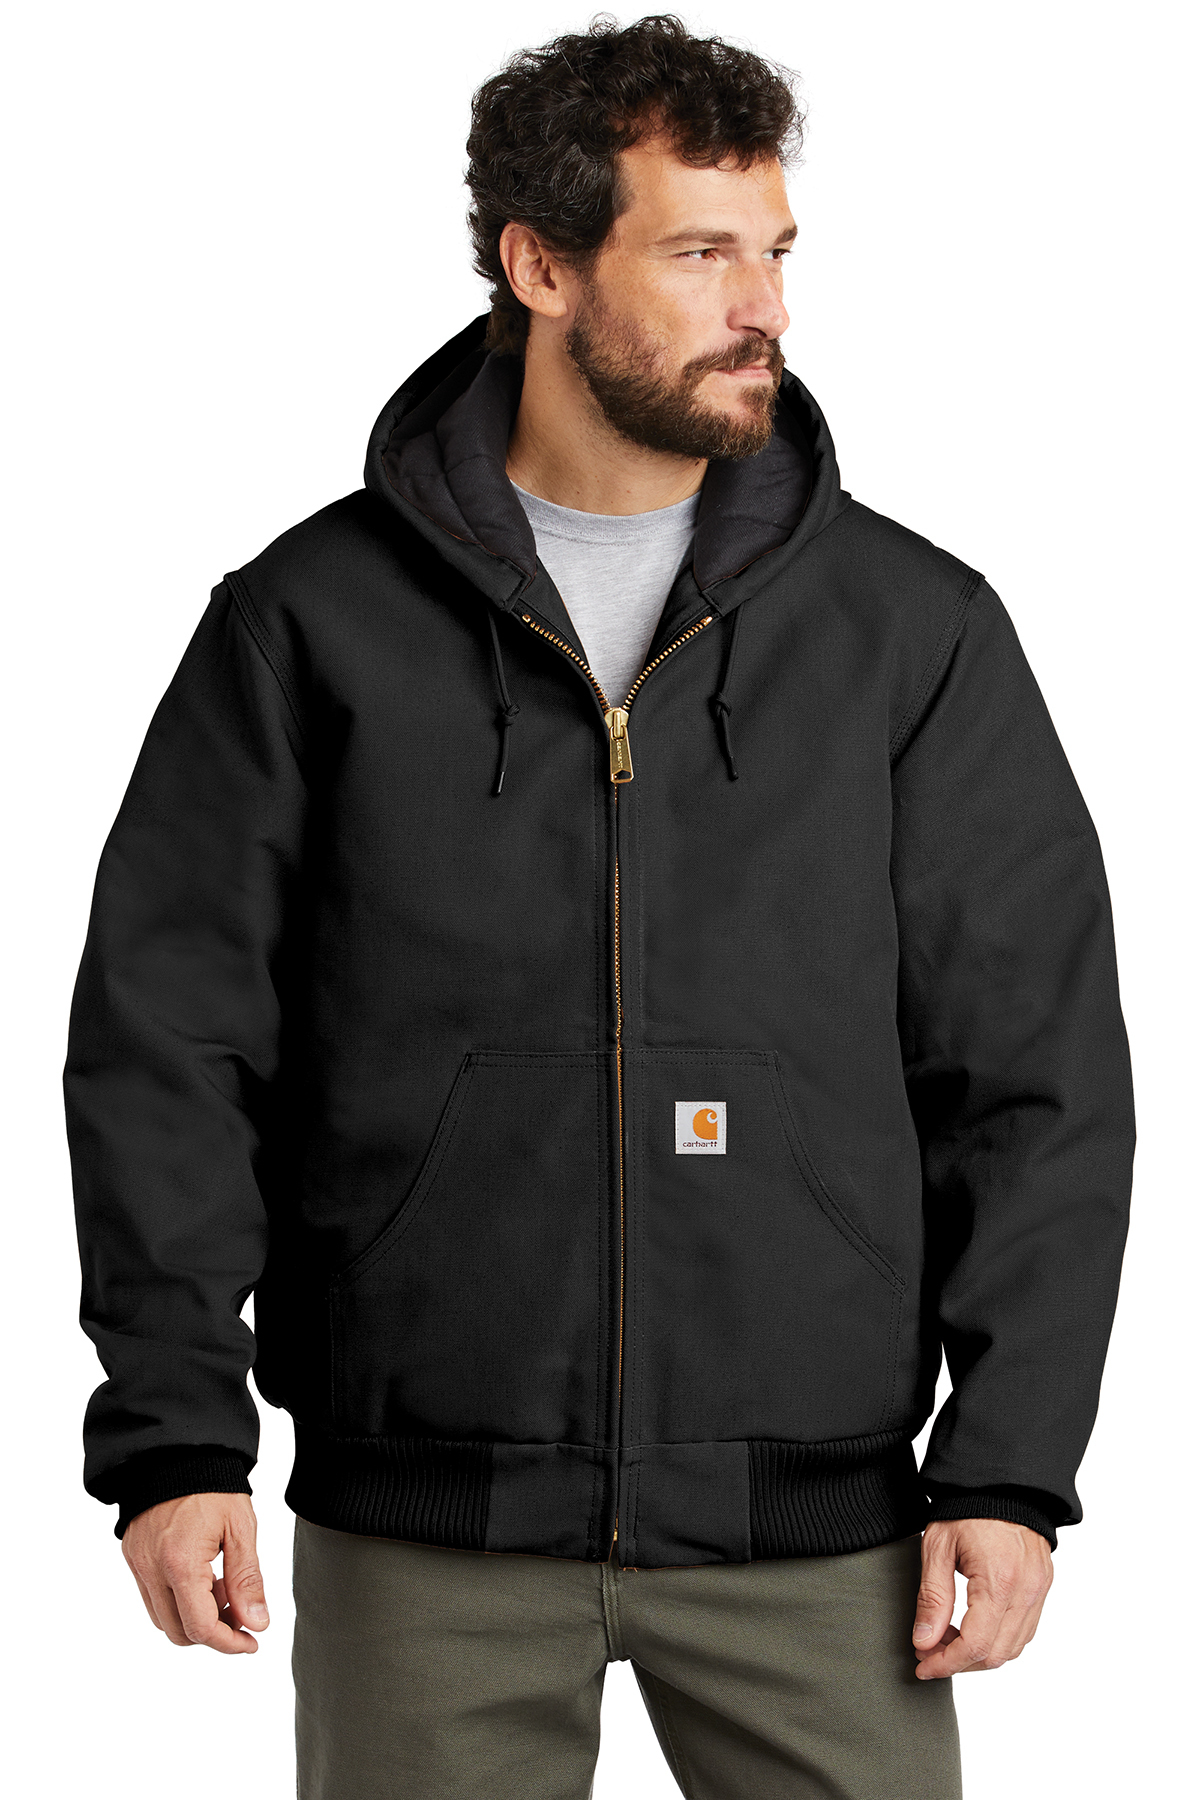 Carhartt Tall Quilted-Flannel-Lined Duck Active Jac | Product | SanMar